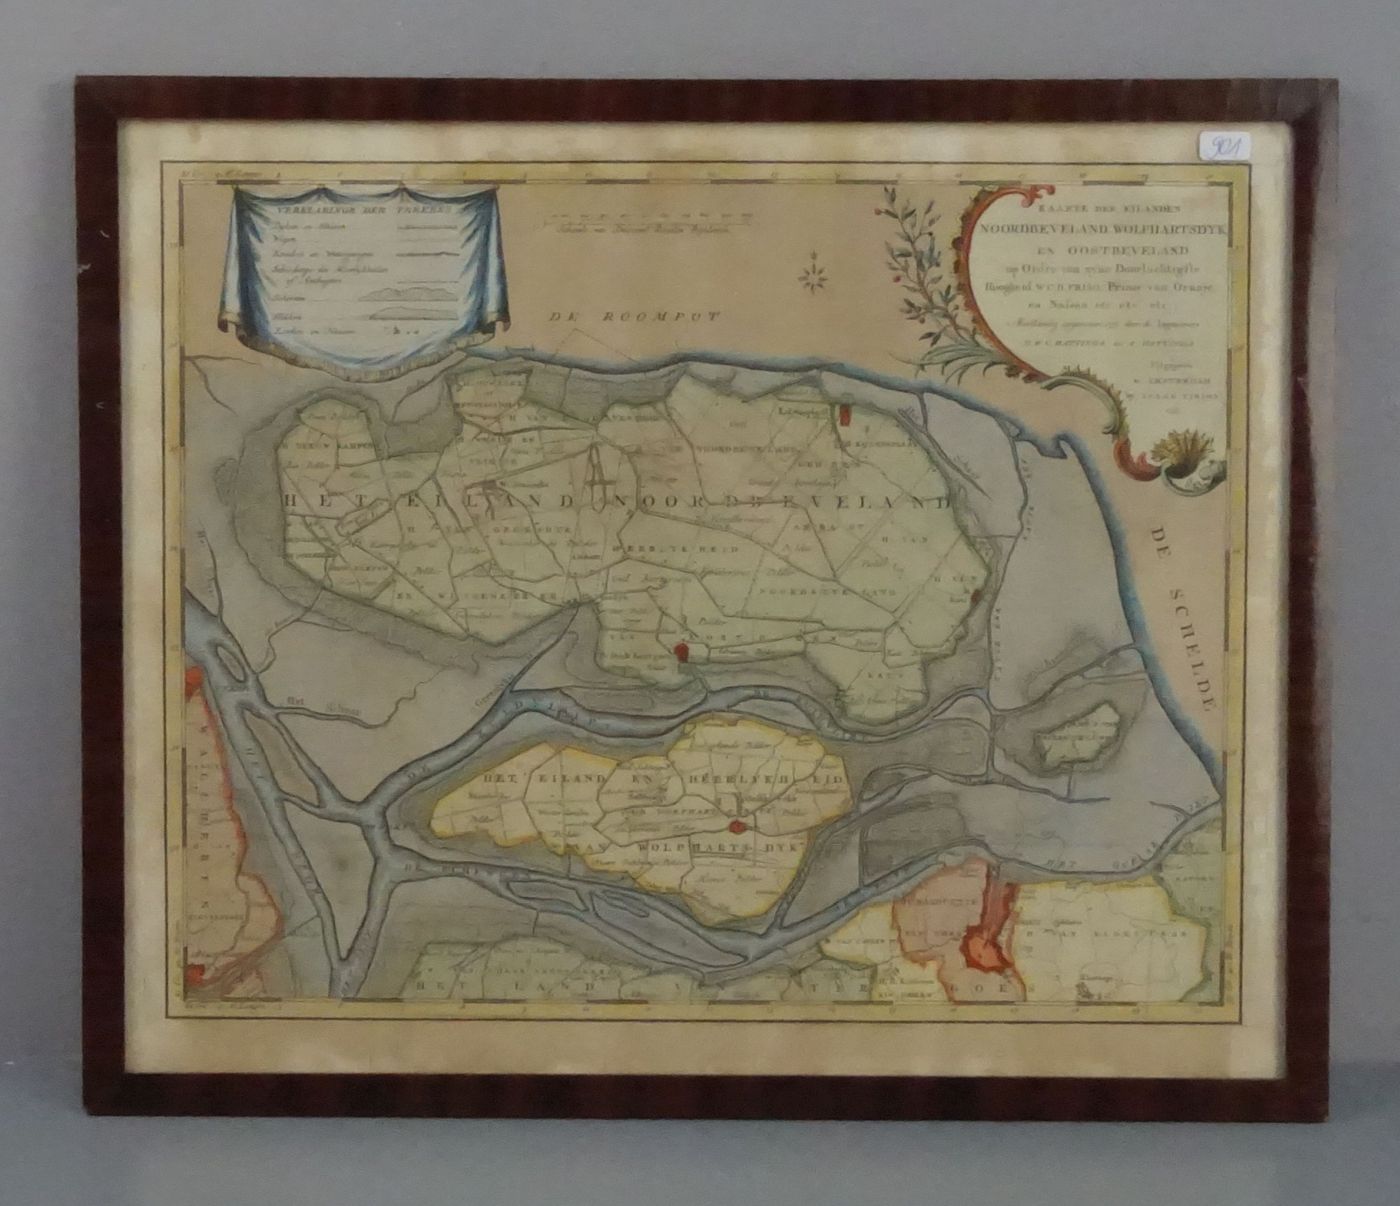 NETHERLANDS MAP OF THE PROVINCE OF ZEELAND OF 1753